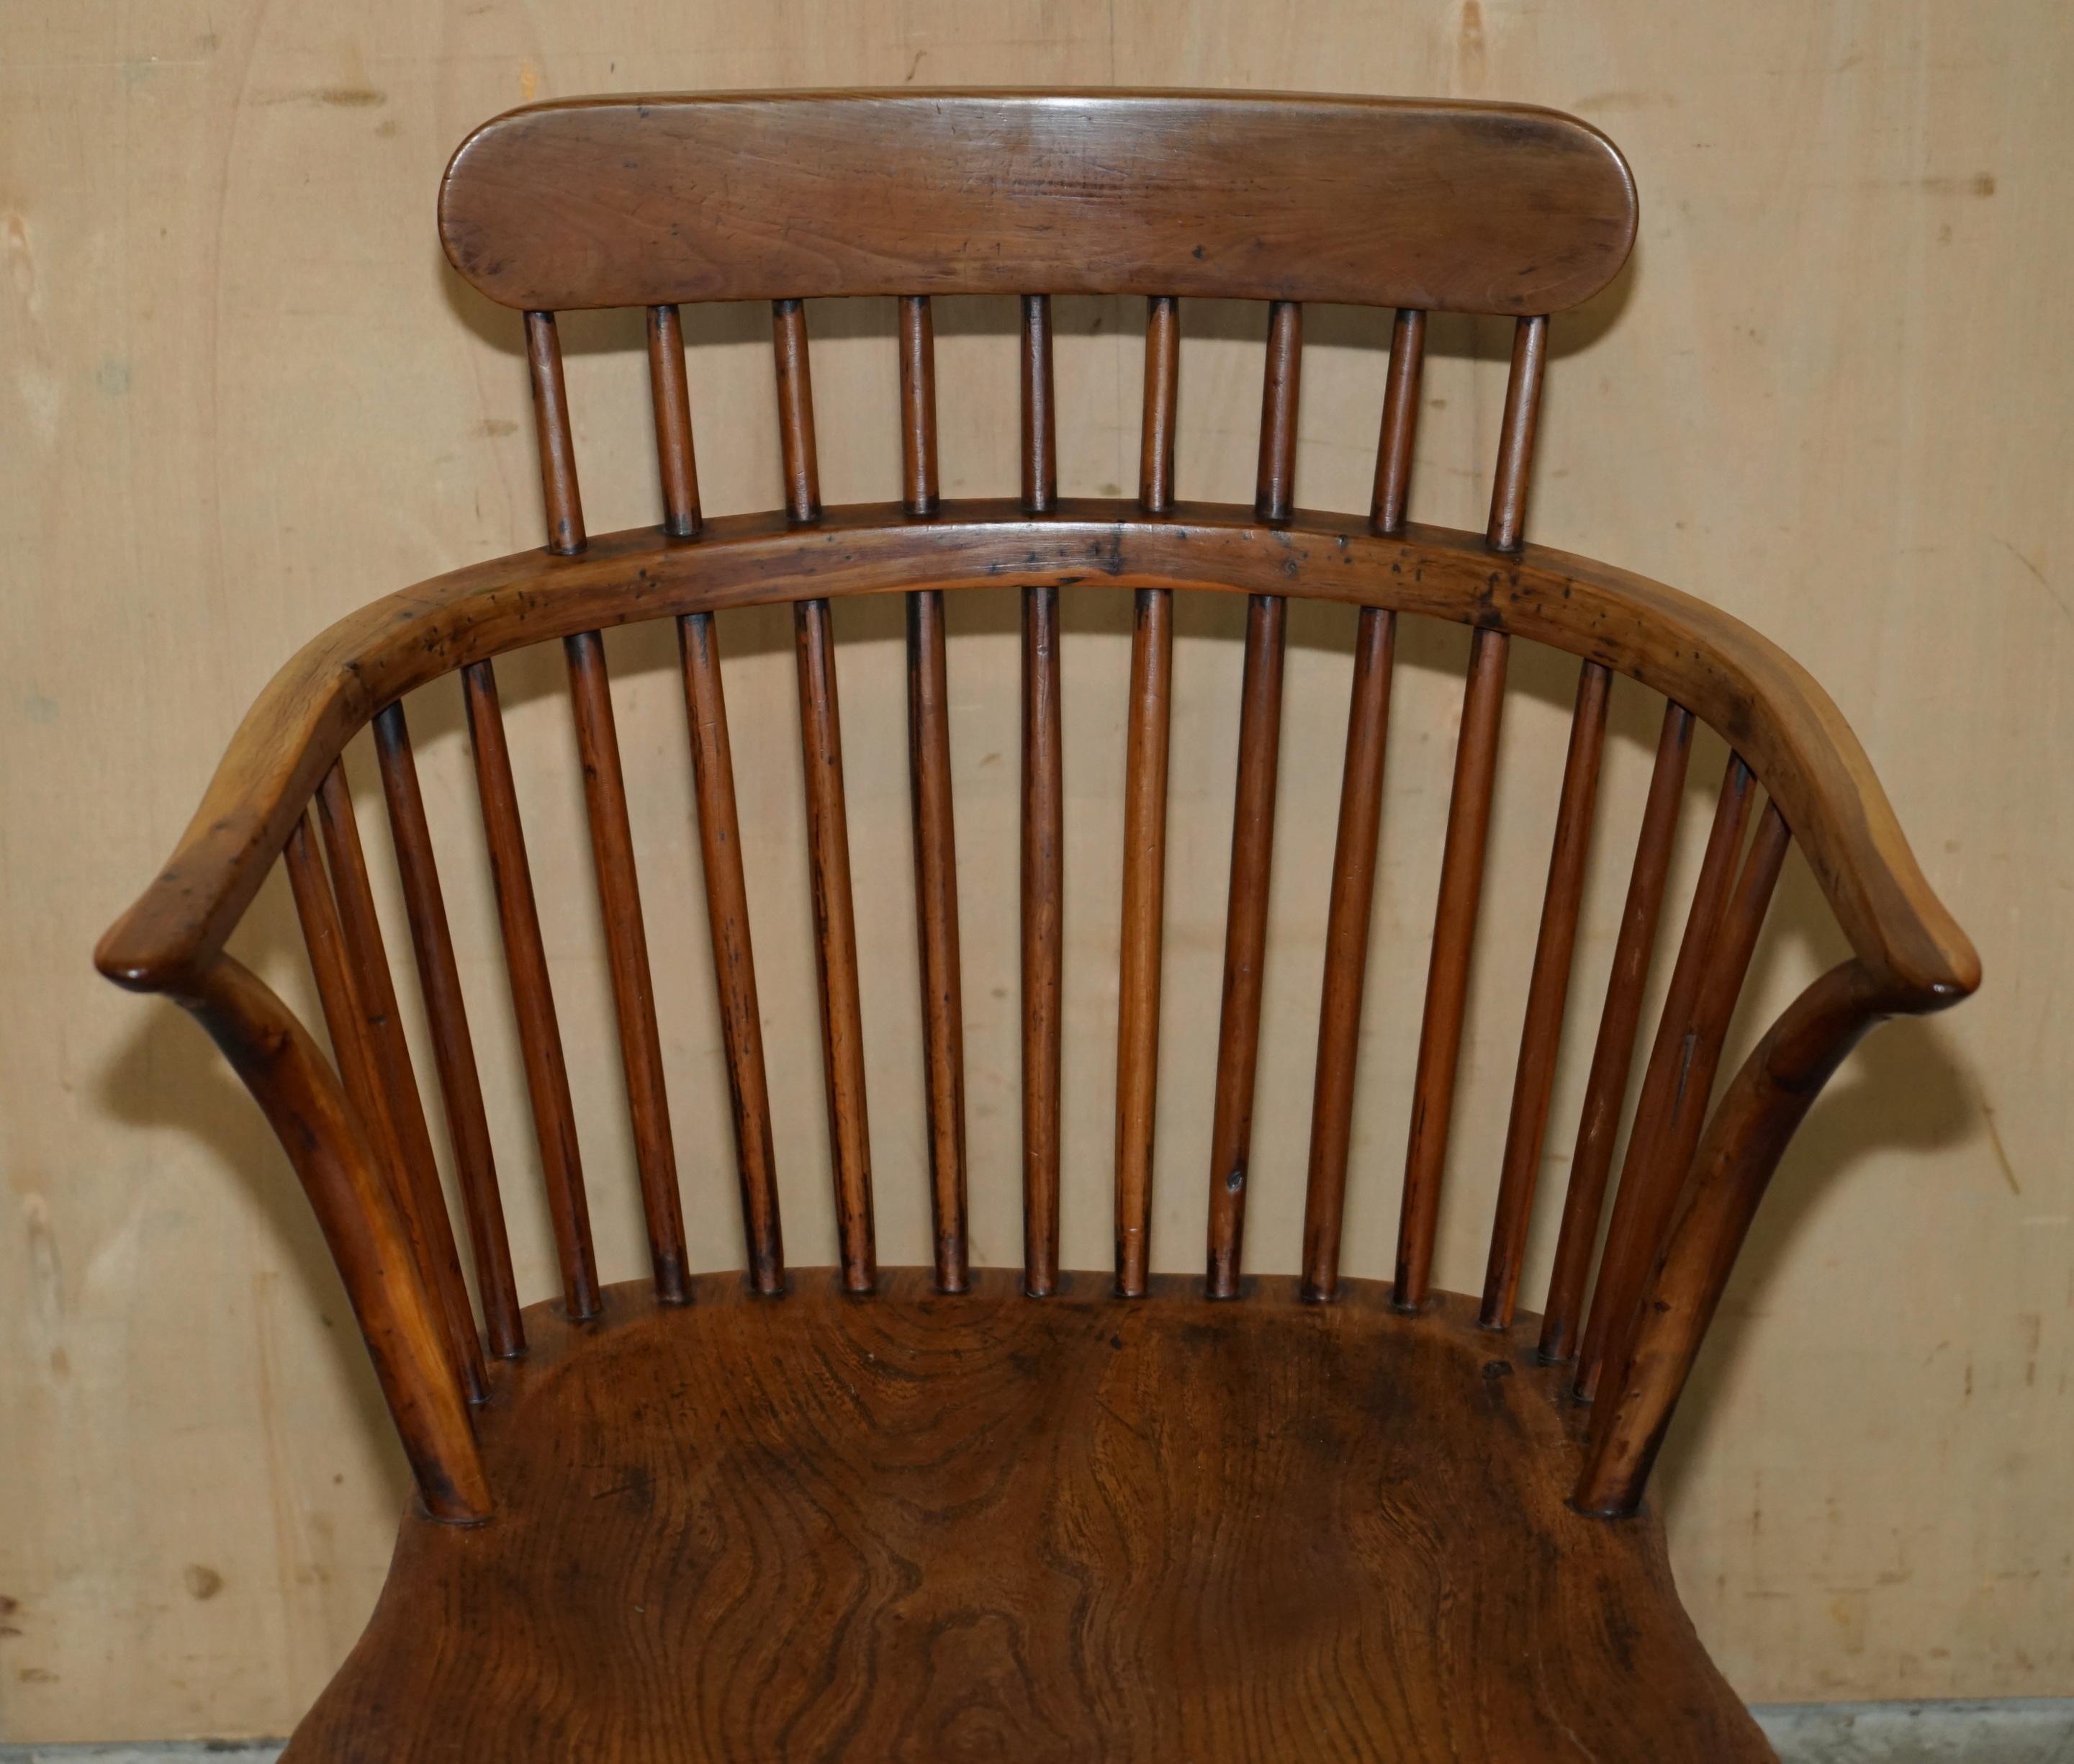 Regency FINE ANTiQUE EARLY 19TH CENTURY BURR YEW WOOD & ELM COMB BACK WINDSOR ARMCHAIR For Sale